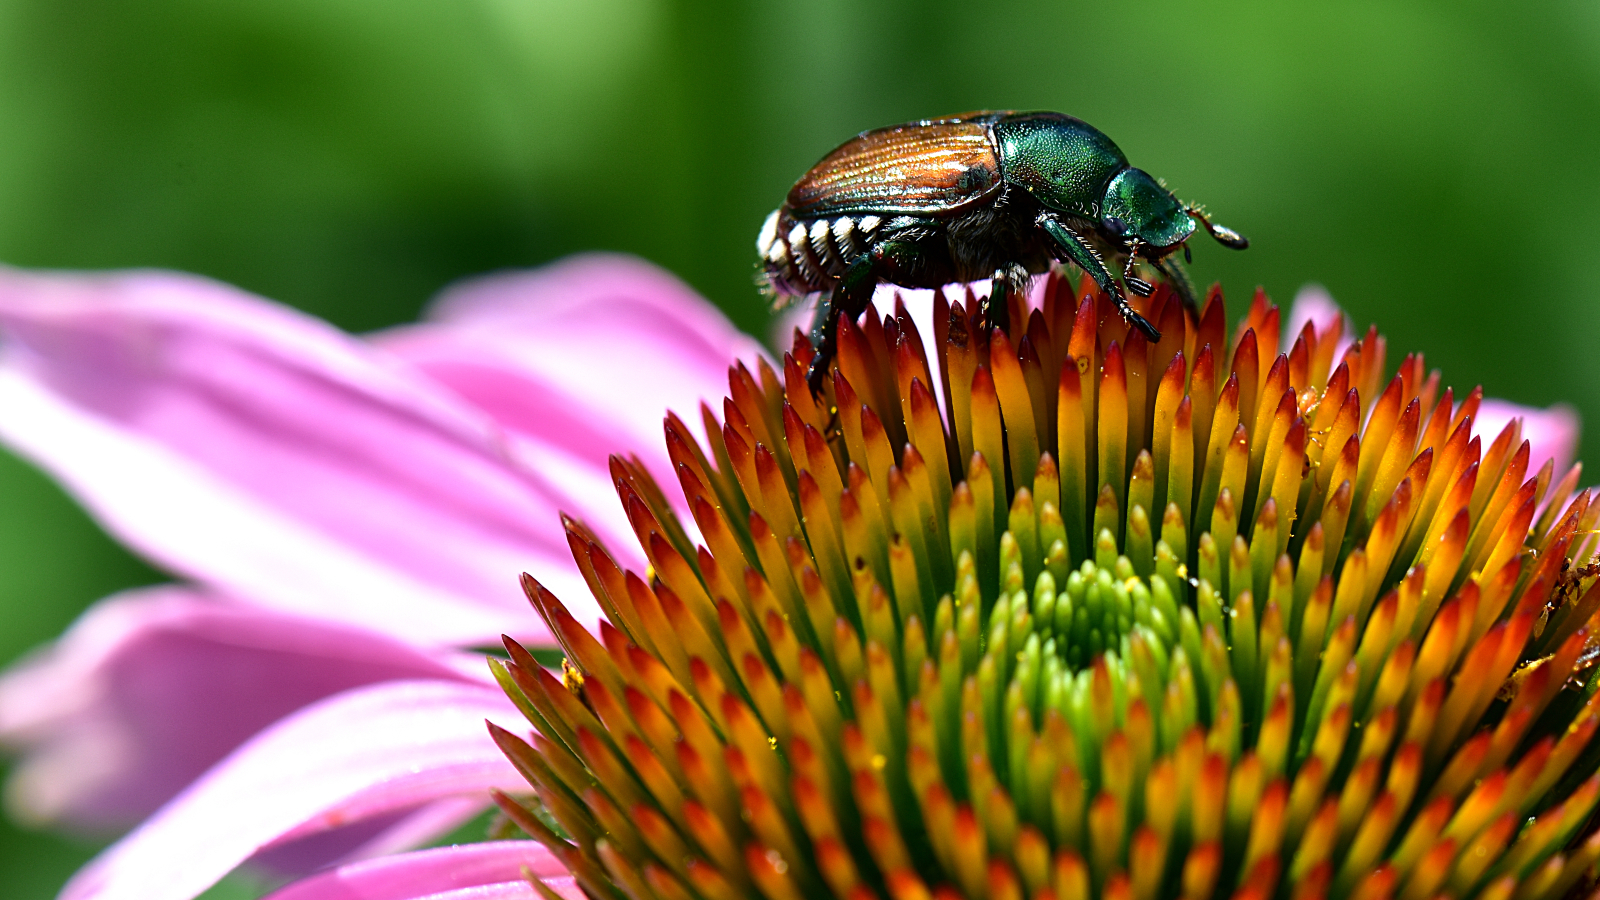 Should You Use Japanese Beetle Traps? Here's What Experts Say